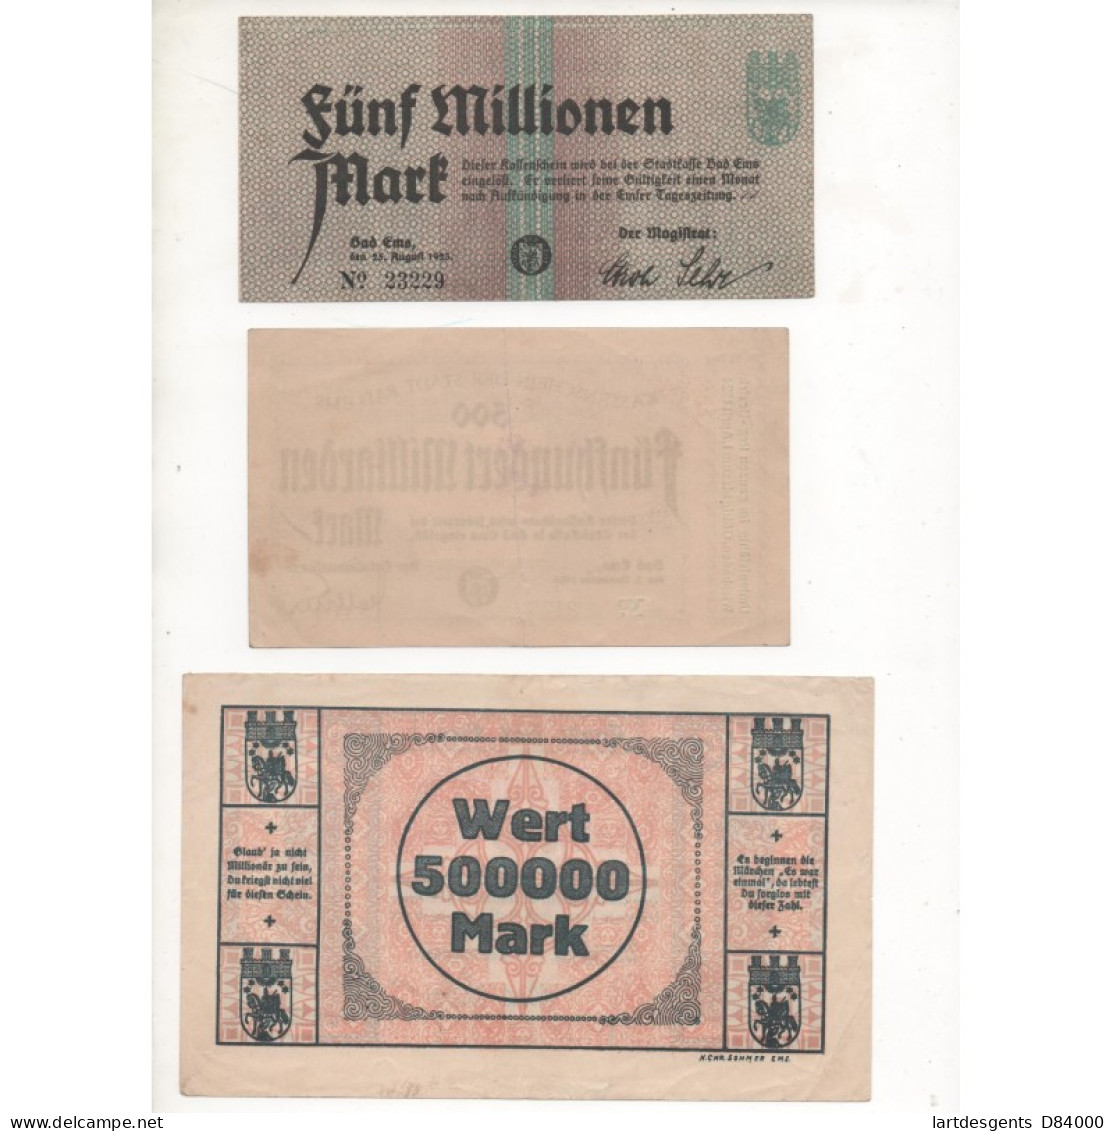 NOTGELD - BAD EMS - 11 Different Notes (B002) - [11] Local Banknote Issues